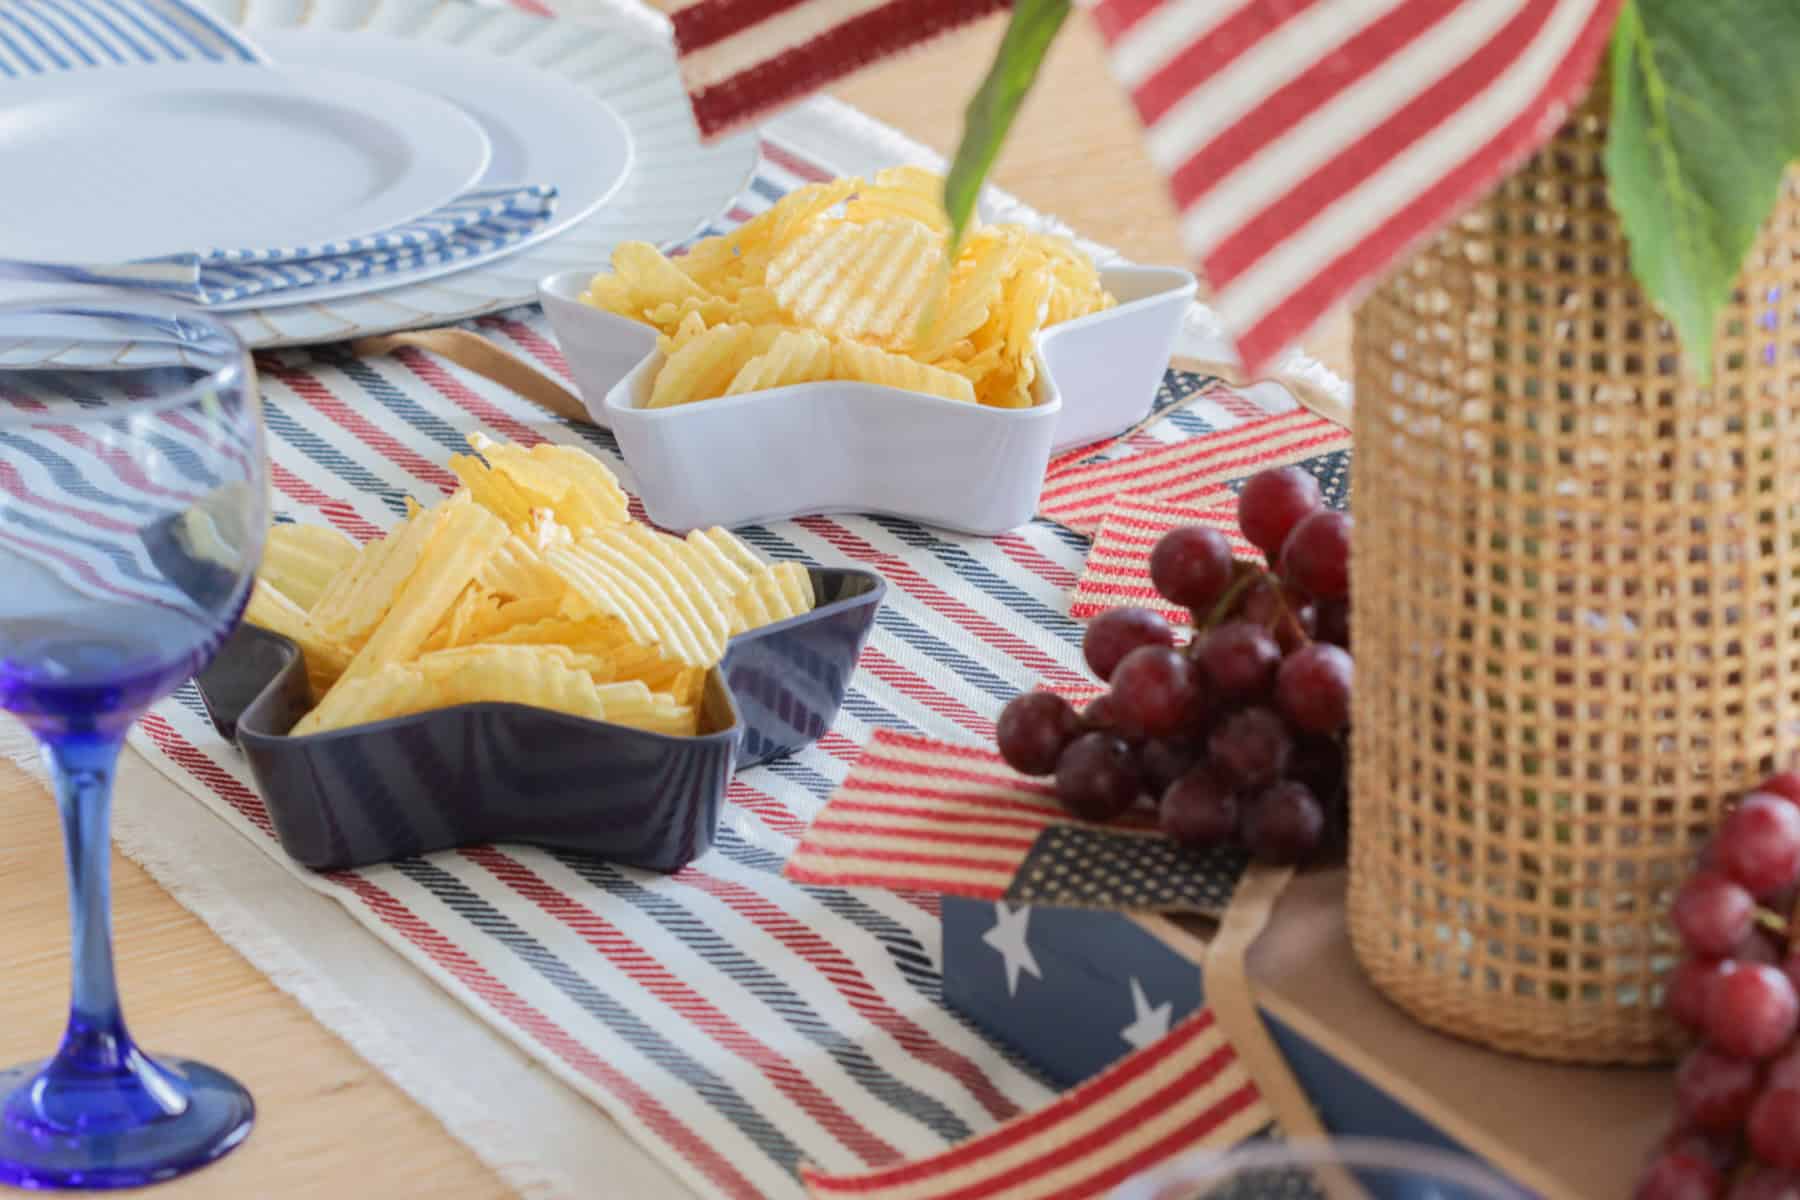 Chips in star plates on table.